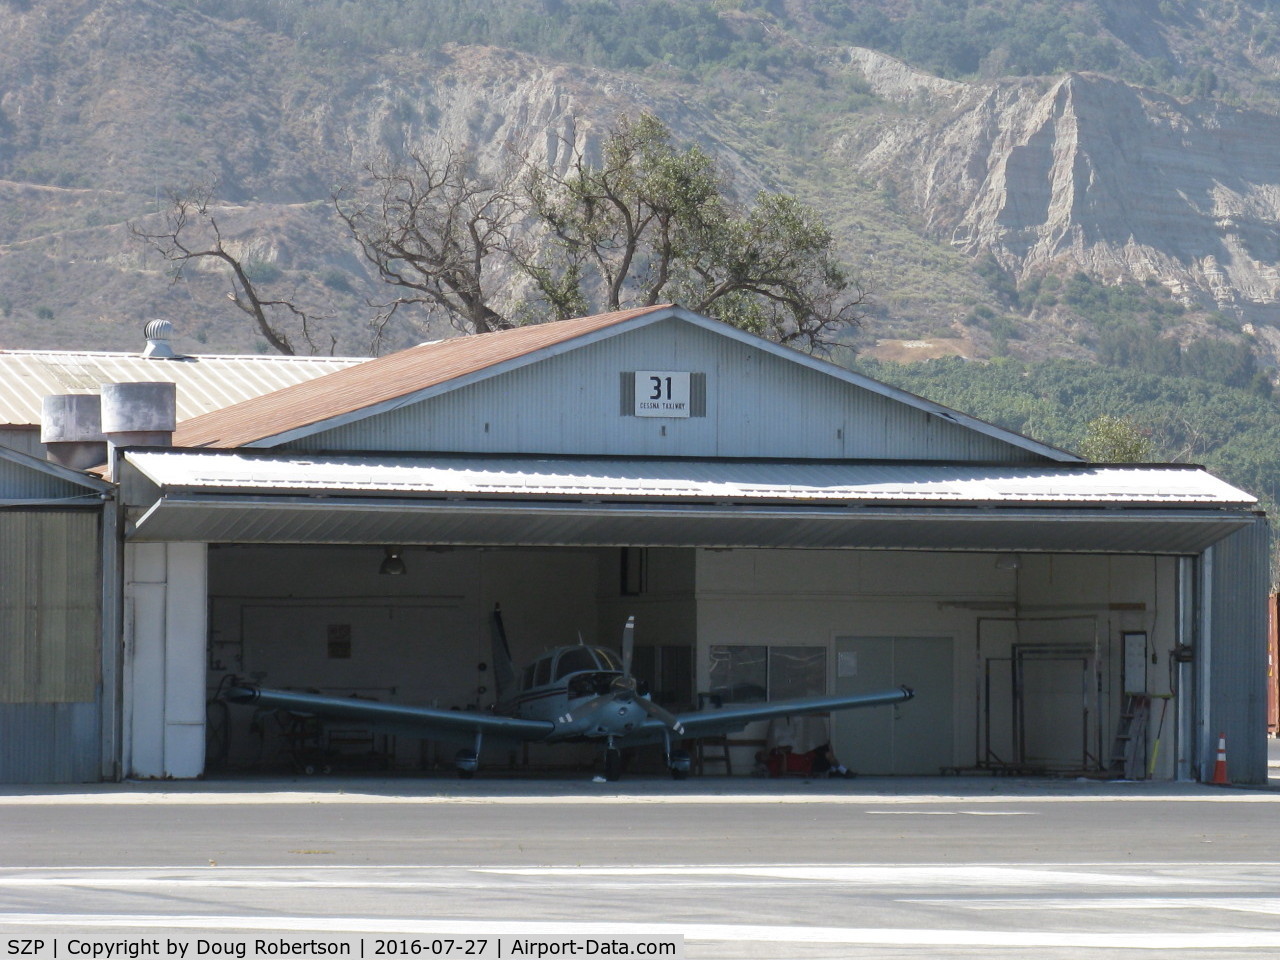 Santa Paula Airport (SZP) - Santa Paula Airport Do-It-Yourself Aircraft Paint Facility. Rare to see doors open, some masking of a Piper PA-28 is being done, and it is already hot mid-morning.